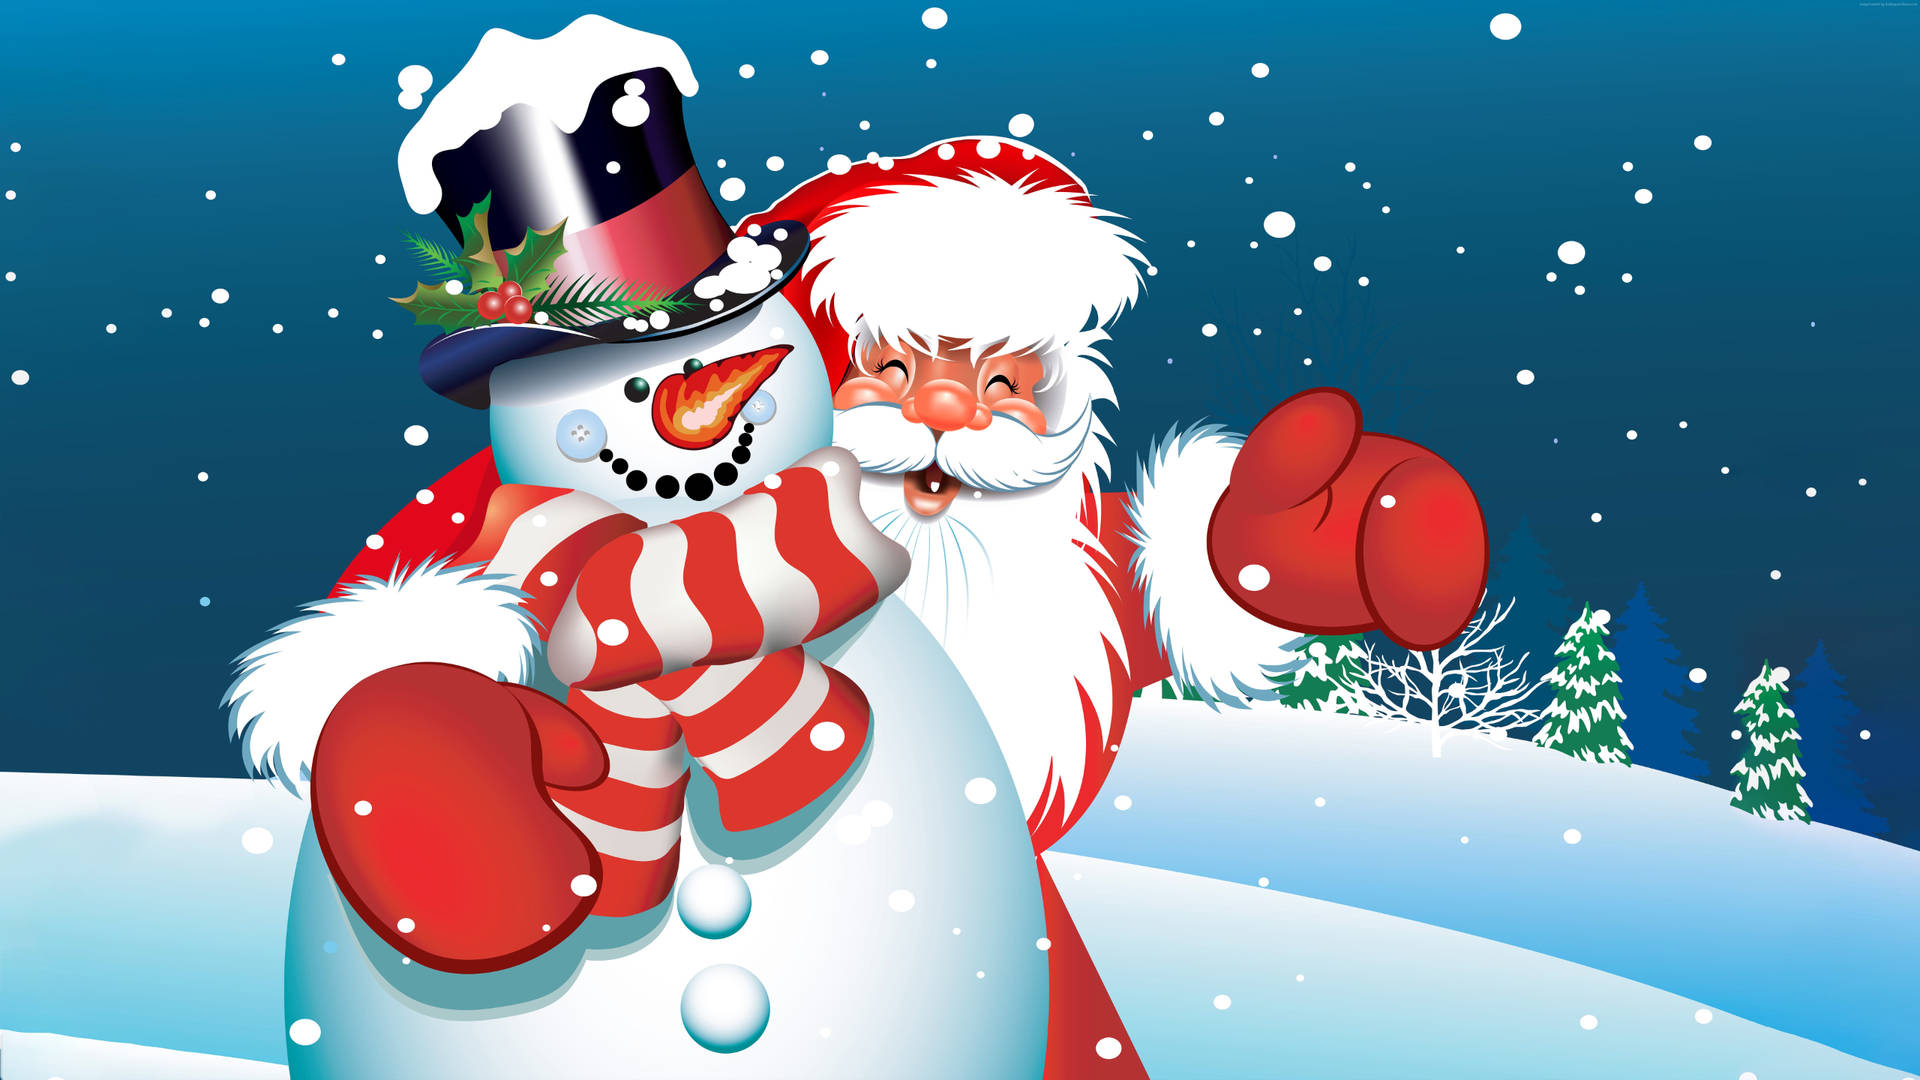 Animated Snowman And Santa Claus